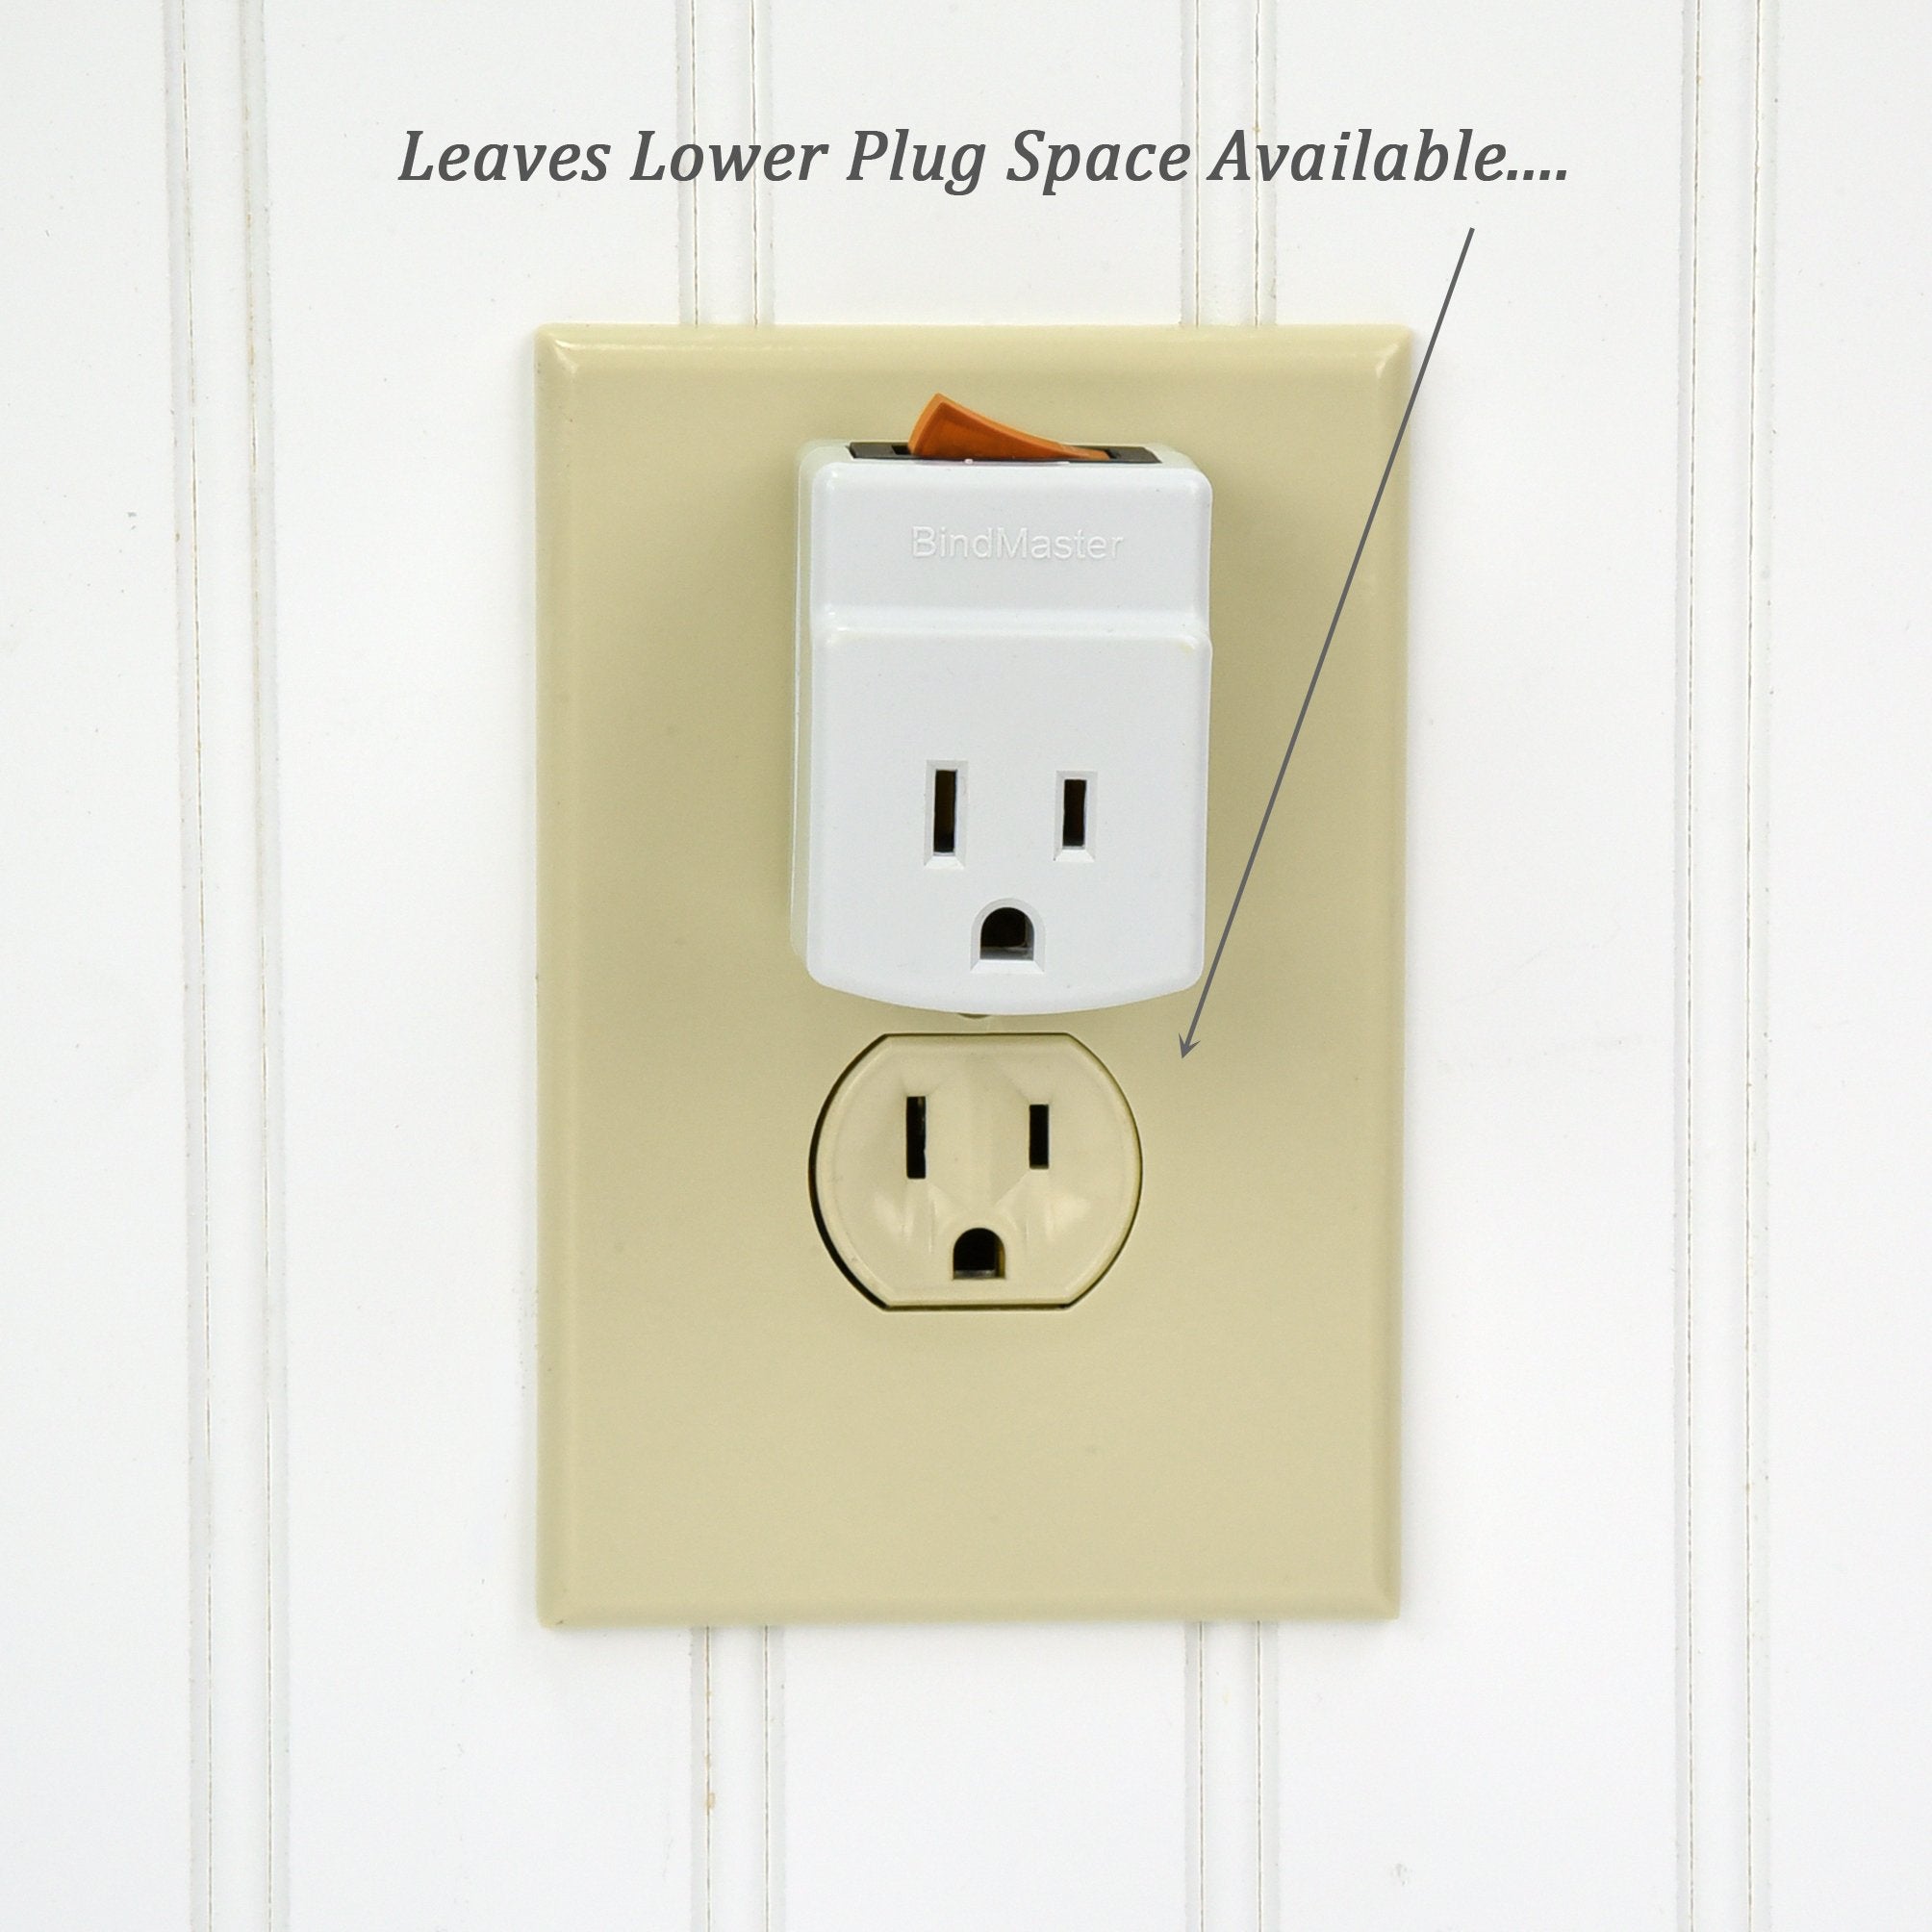 New! 3 Prong Grounded Single Port Power Adapter for Outlet with Orange Indicator On/Off Switch to be Energy Saving (3 Pack)  - Acceptable